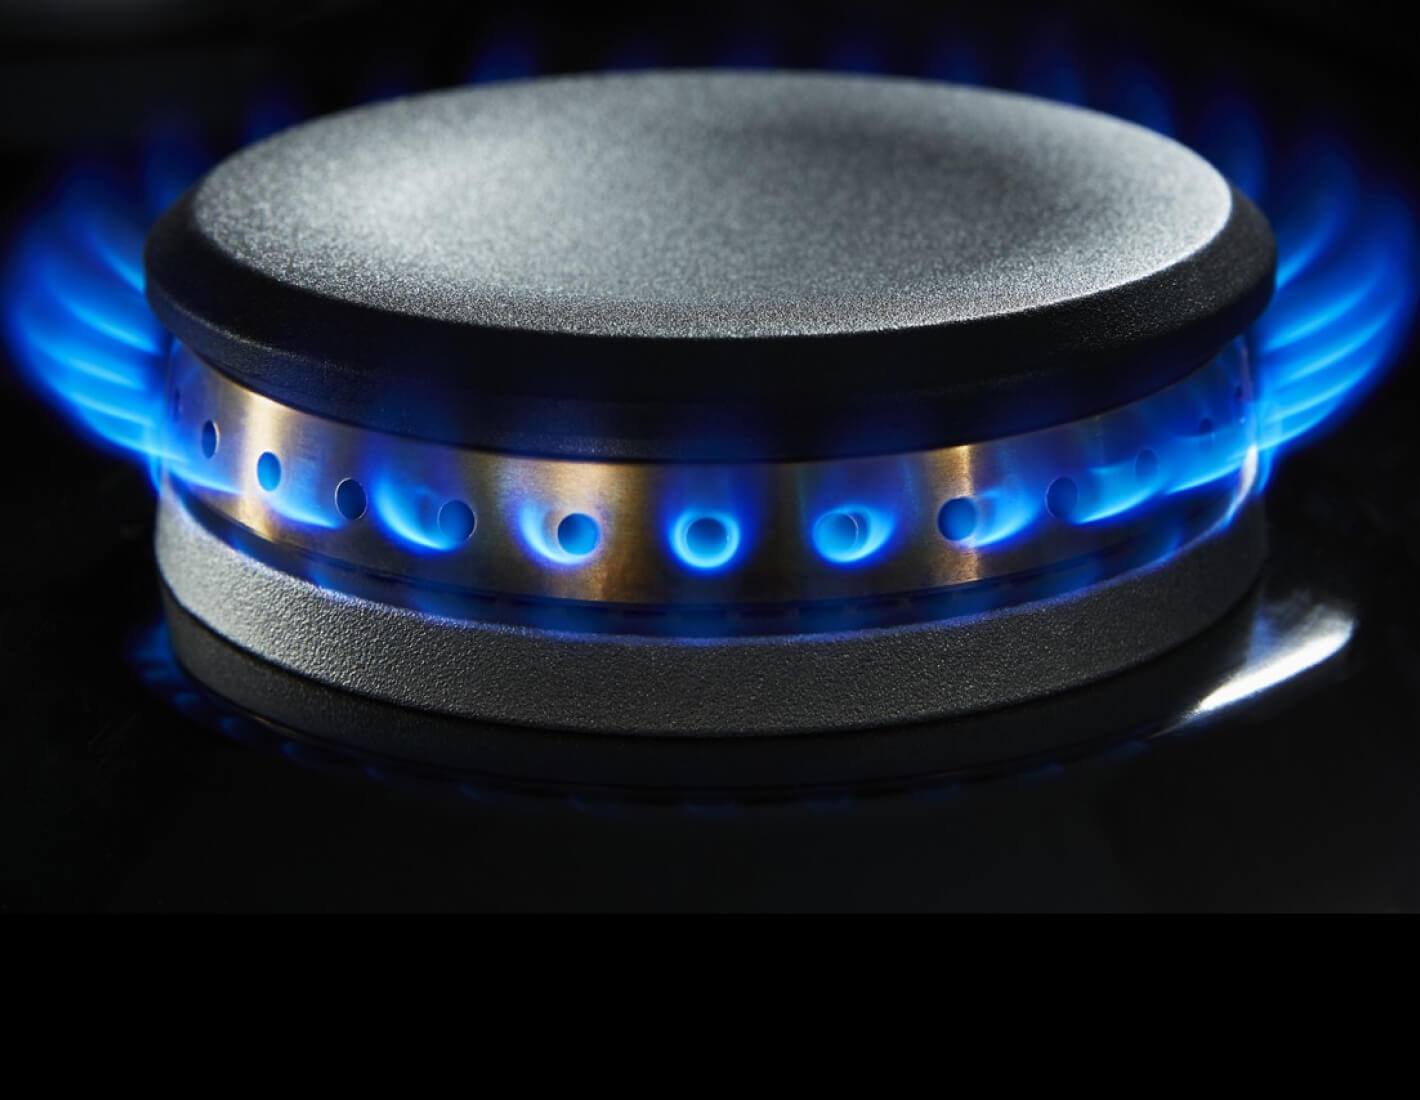 A lit dual-stacked burner.